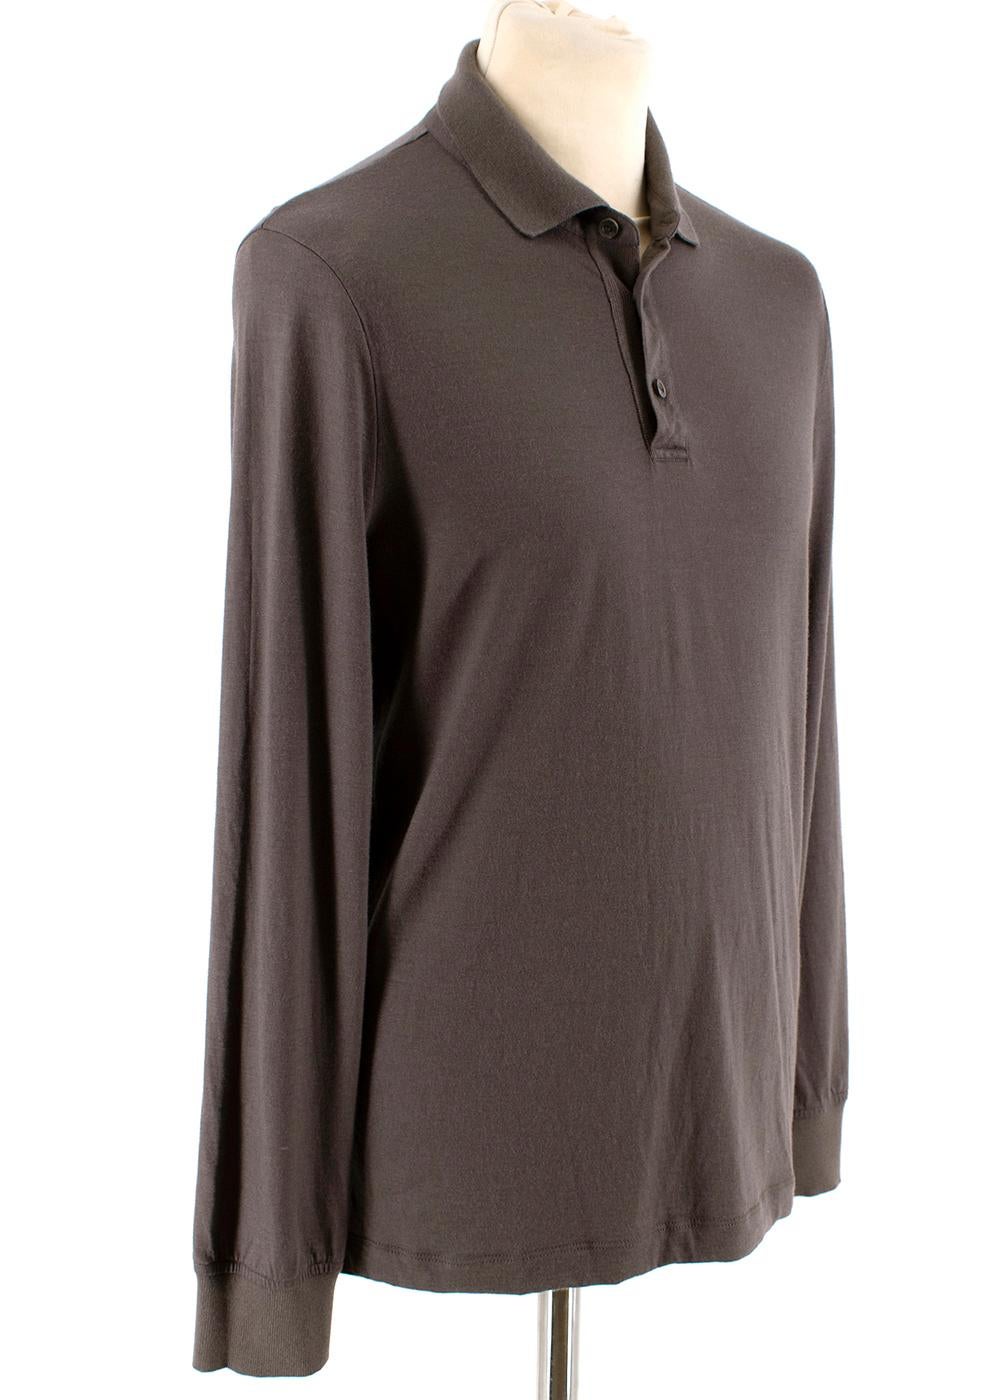 Loro Piana Chocolate Cashmere Knit Polo

- Lightweight
- Subtle heathered coloring 
- Relaxed collar
- Loose fit

Materials:
100% Cashmere

Made in Italy
Professional dry clean only

Measurements:
Approx. 
Shoulders 40cm
Sleeves 62cm
Chest